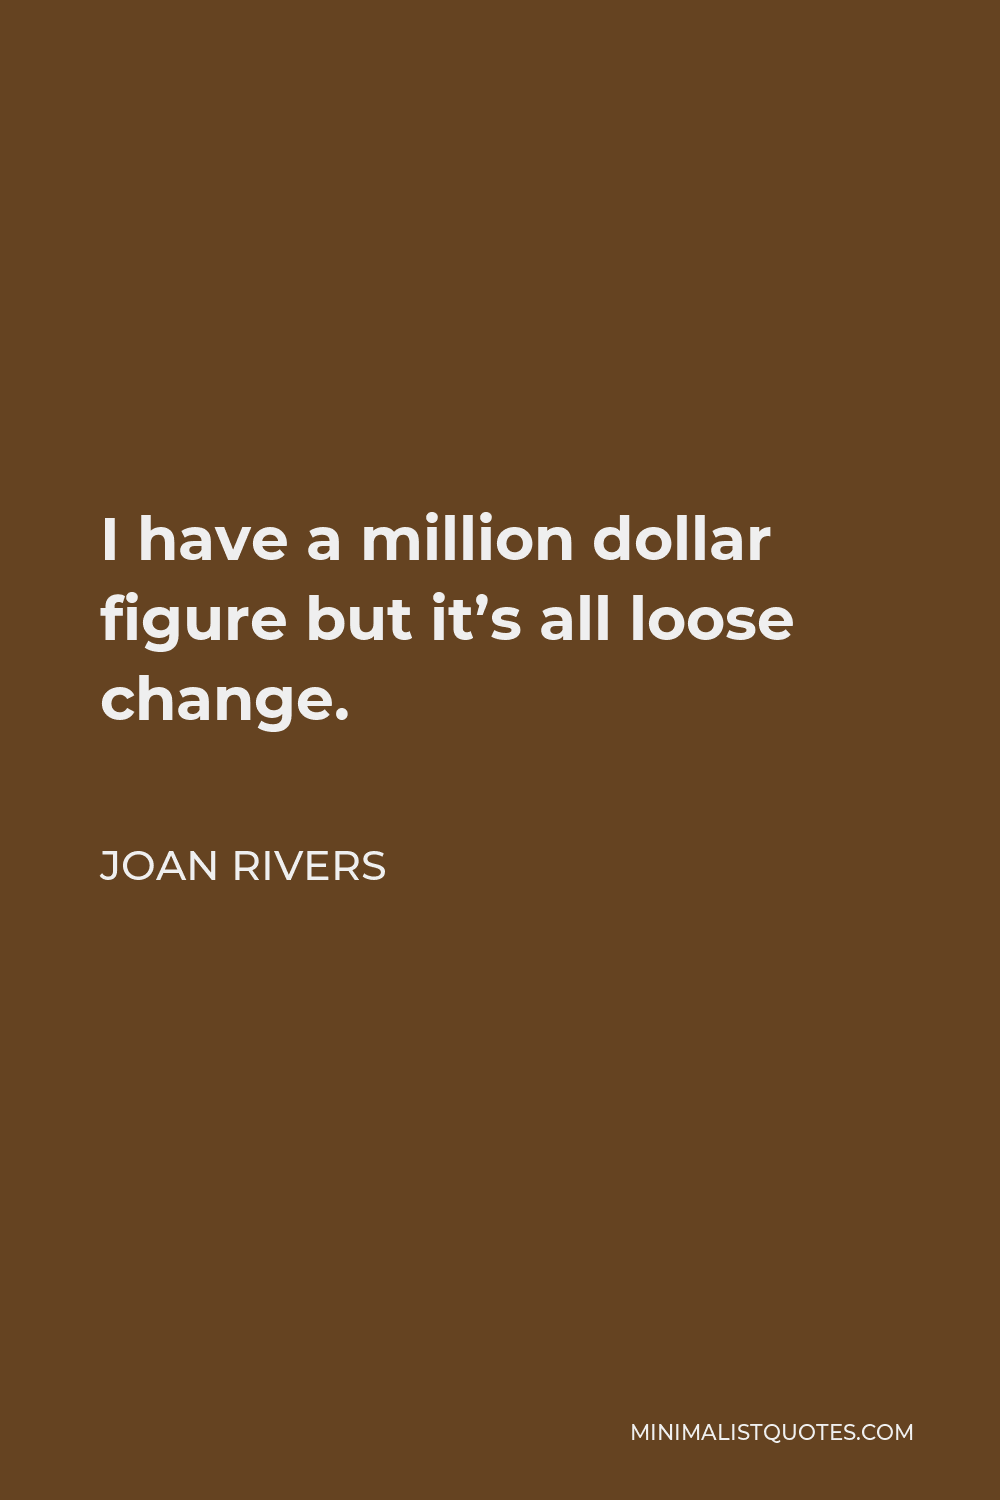 Joan Rivers Quote - I have a million dollar figure but it’s all loose change.